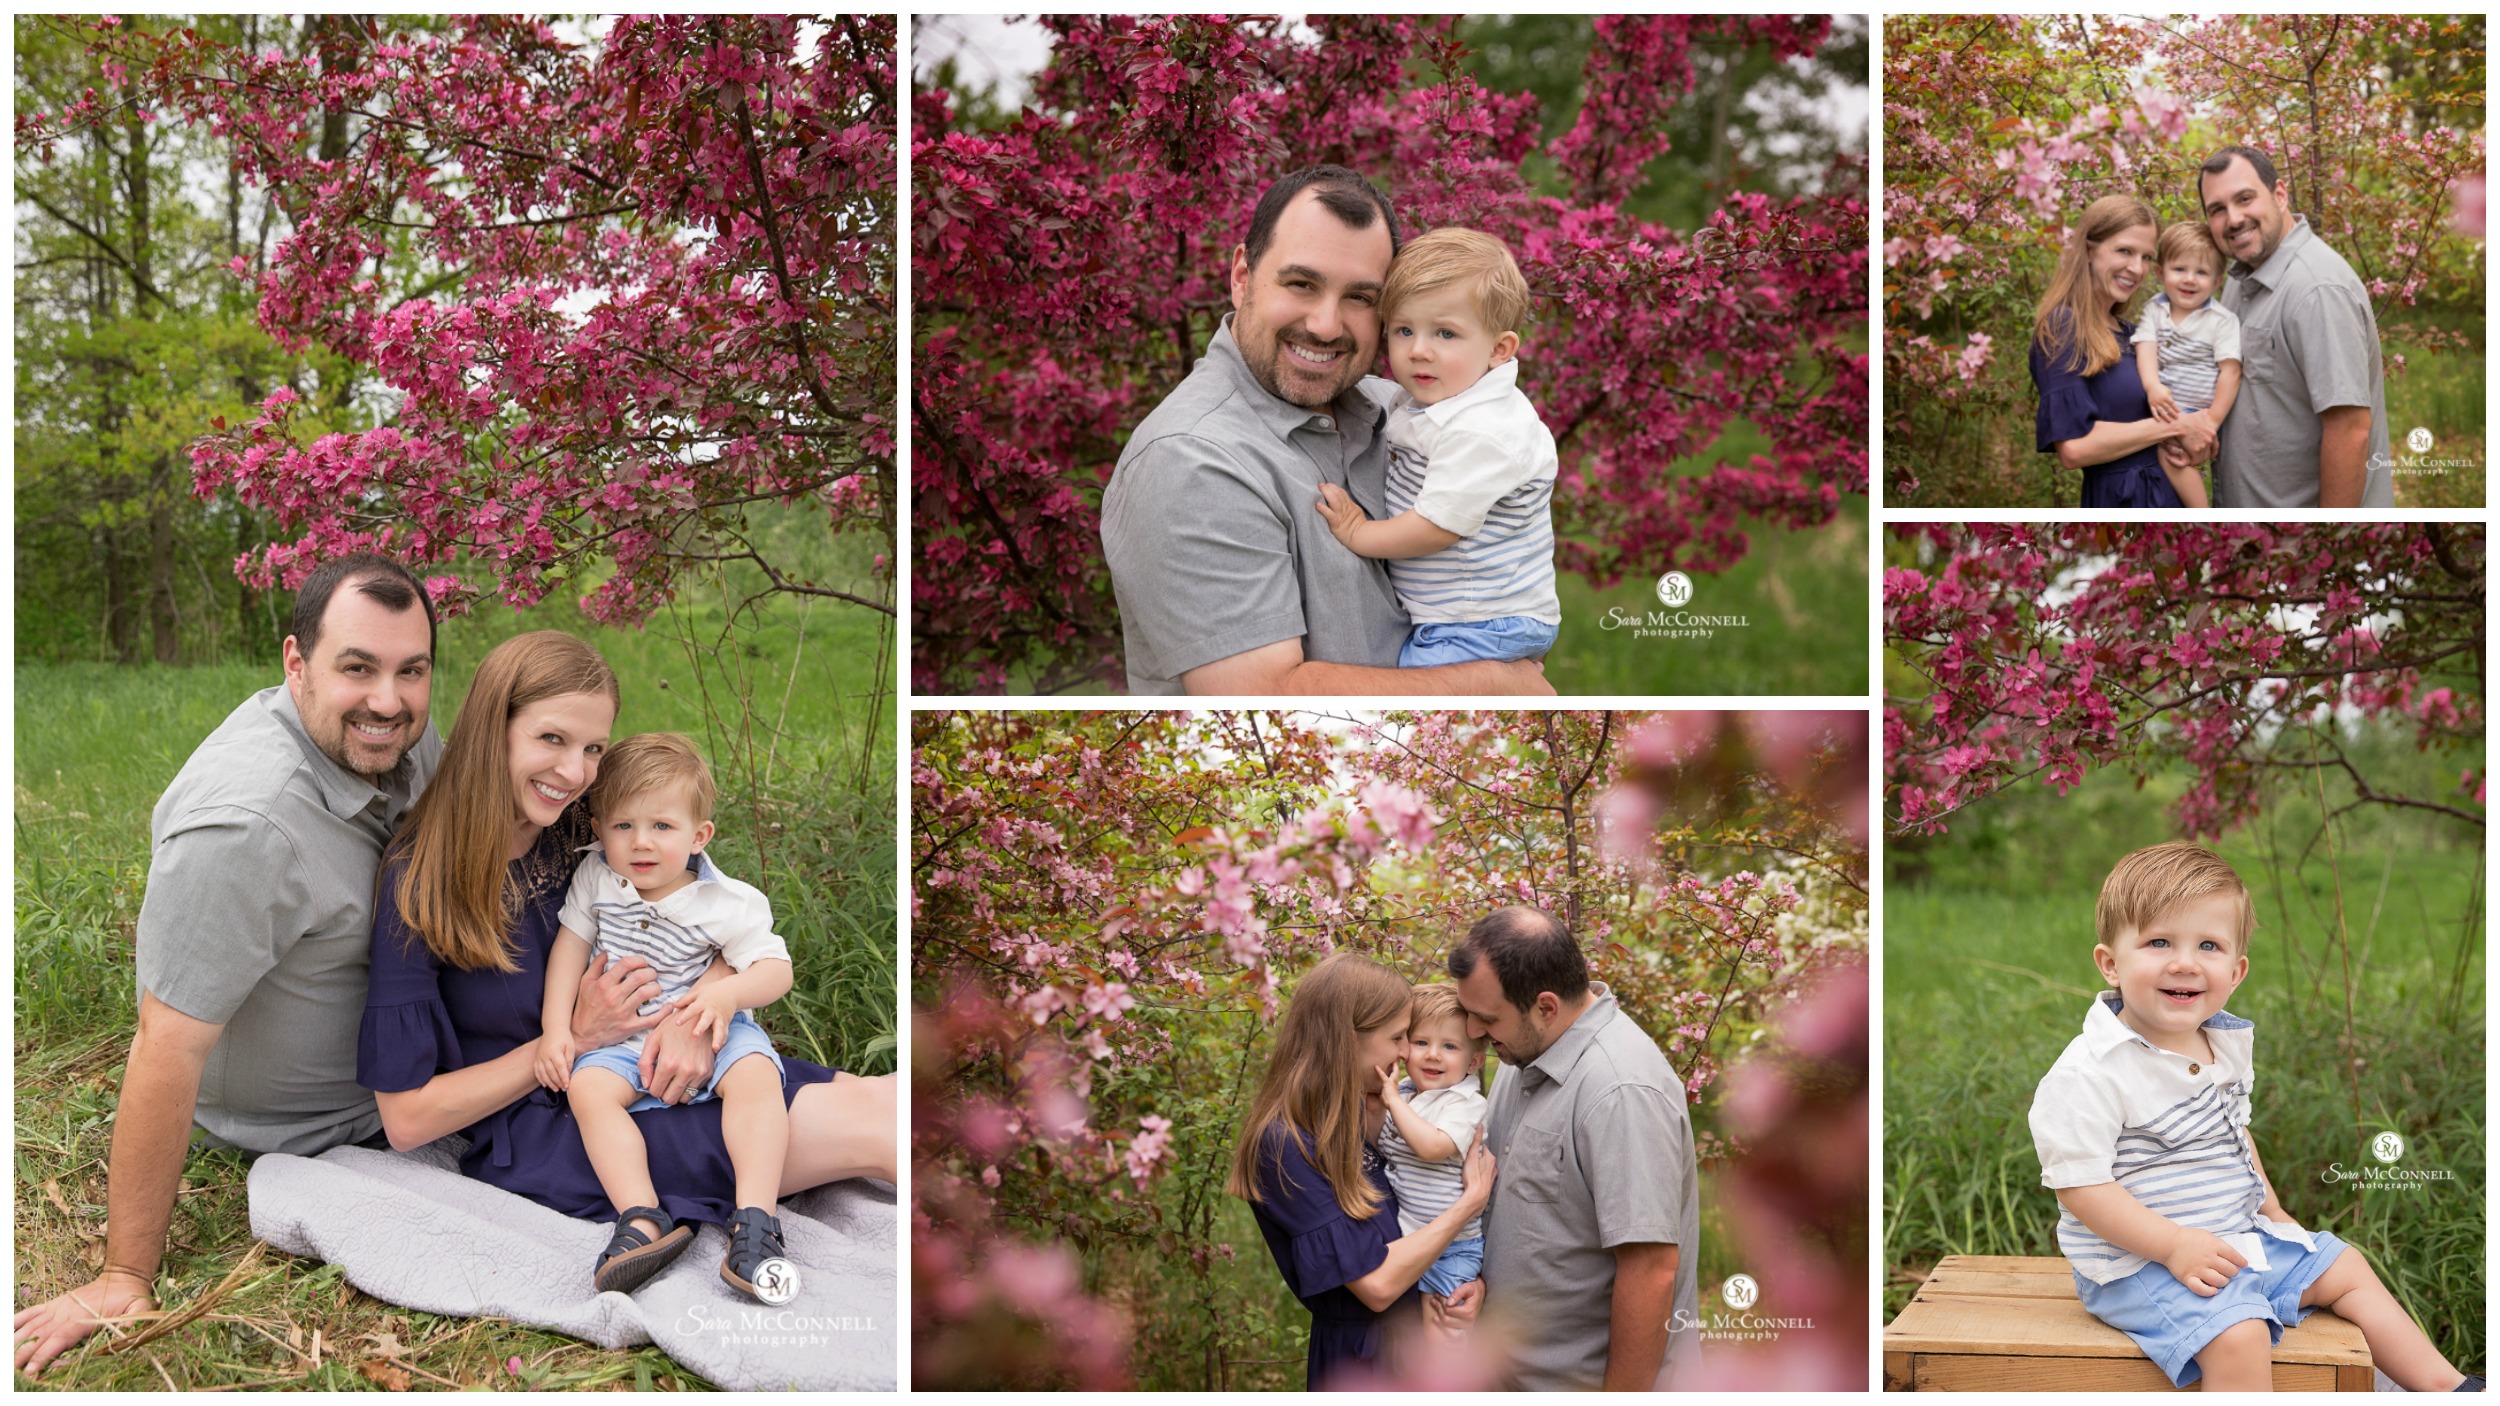 Ottawa Spring Blossom Photo Sessions by Sara McConnell Photography